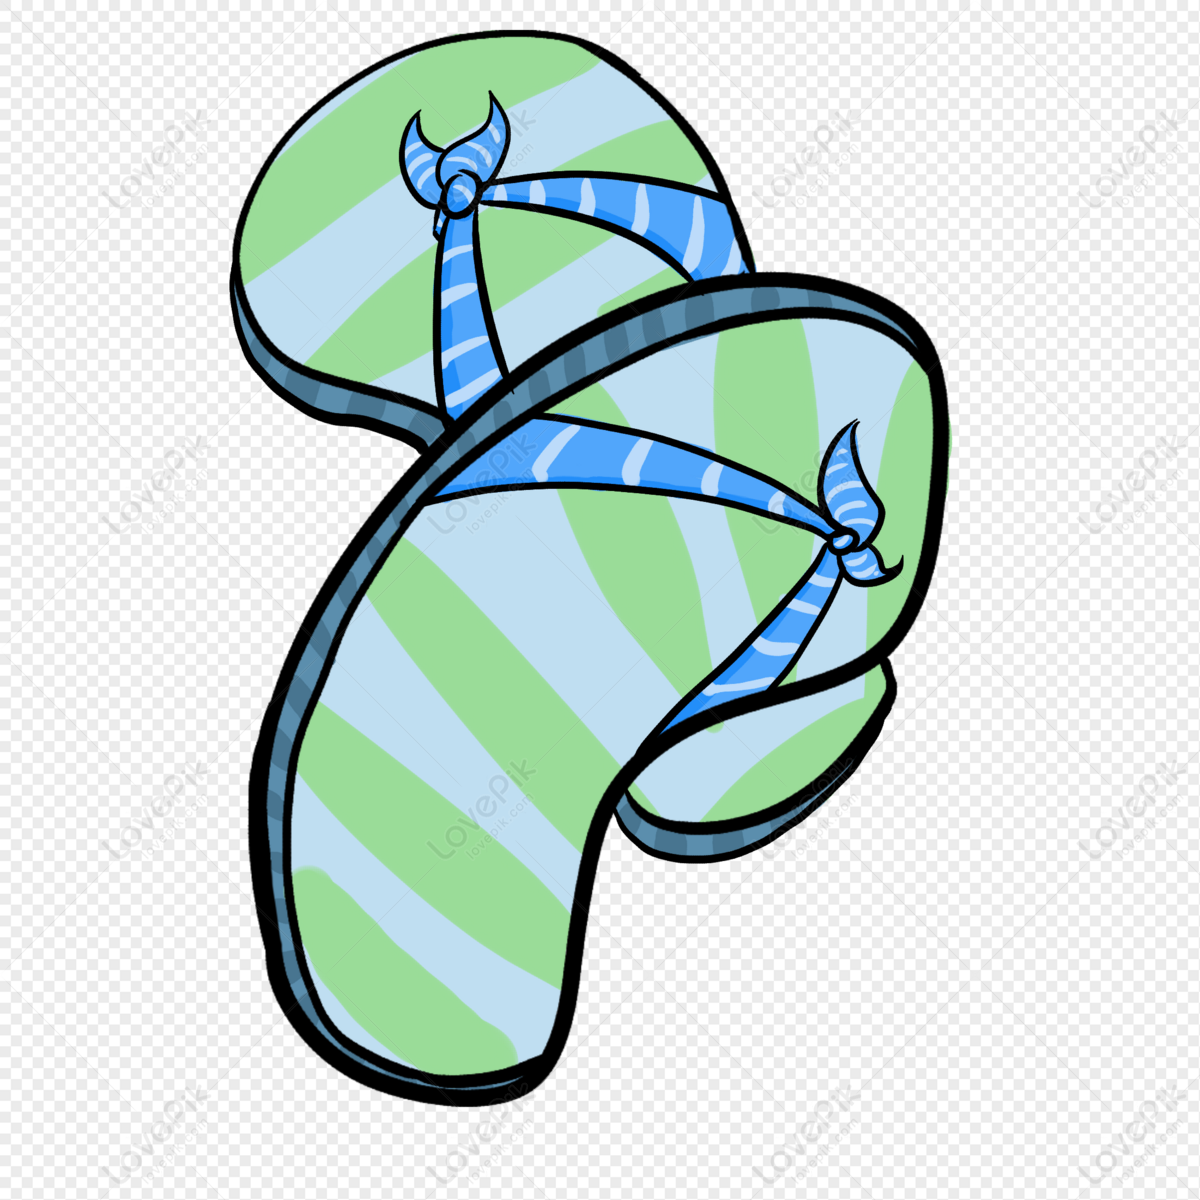 Slipper Cute Illustration PNG Transparent Image And Clipart Image For ...